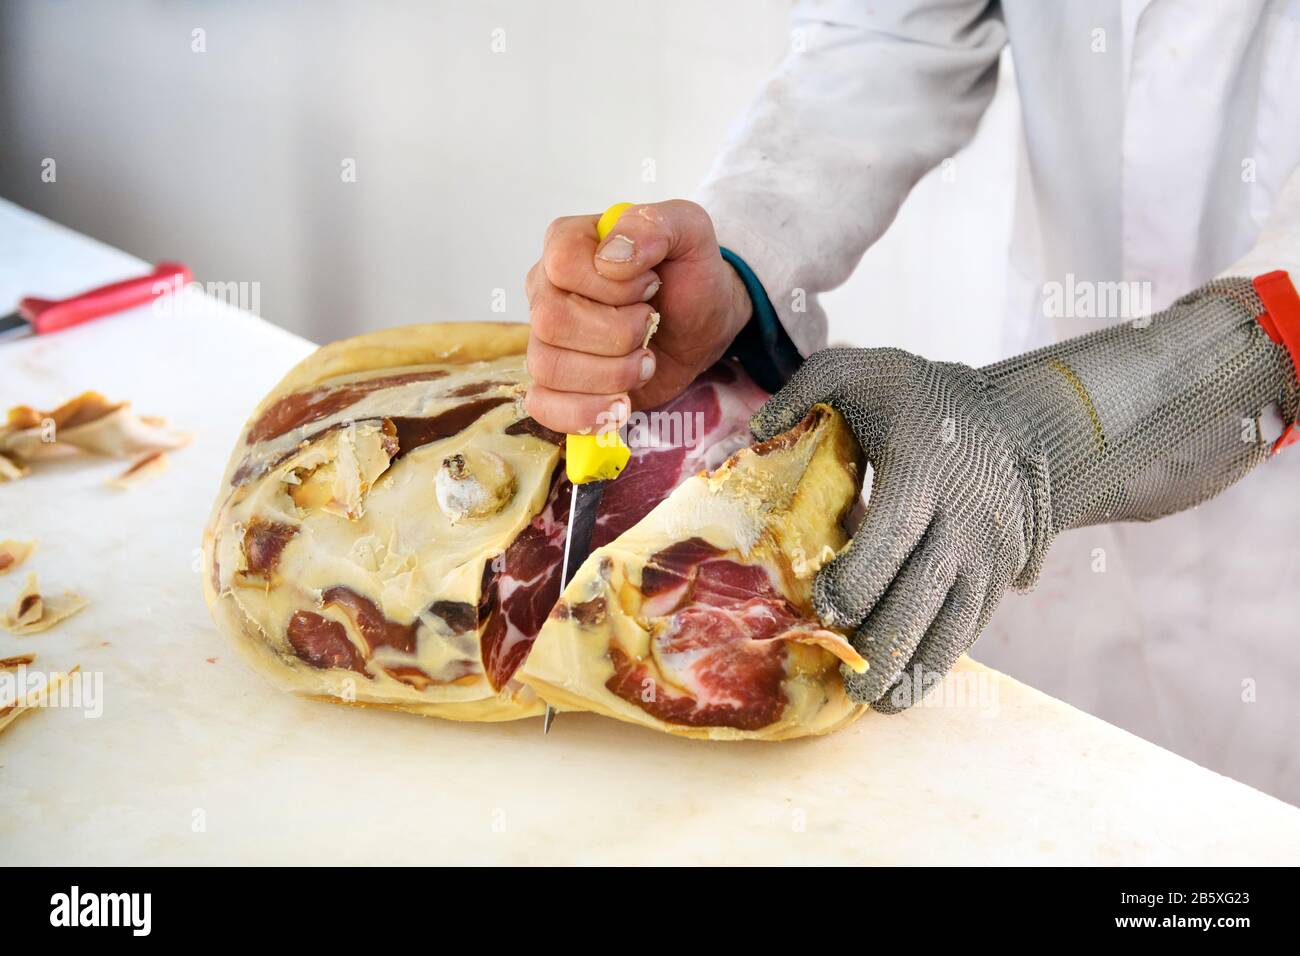 Butcher with short sharp knife deboning pice of prosciutto ham meat, using wire mesh cut resistant glove Stock Photo